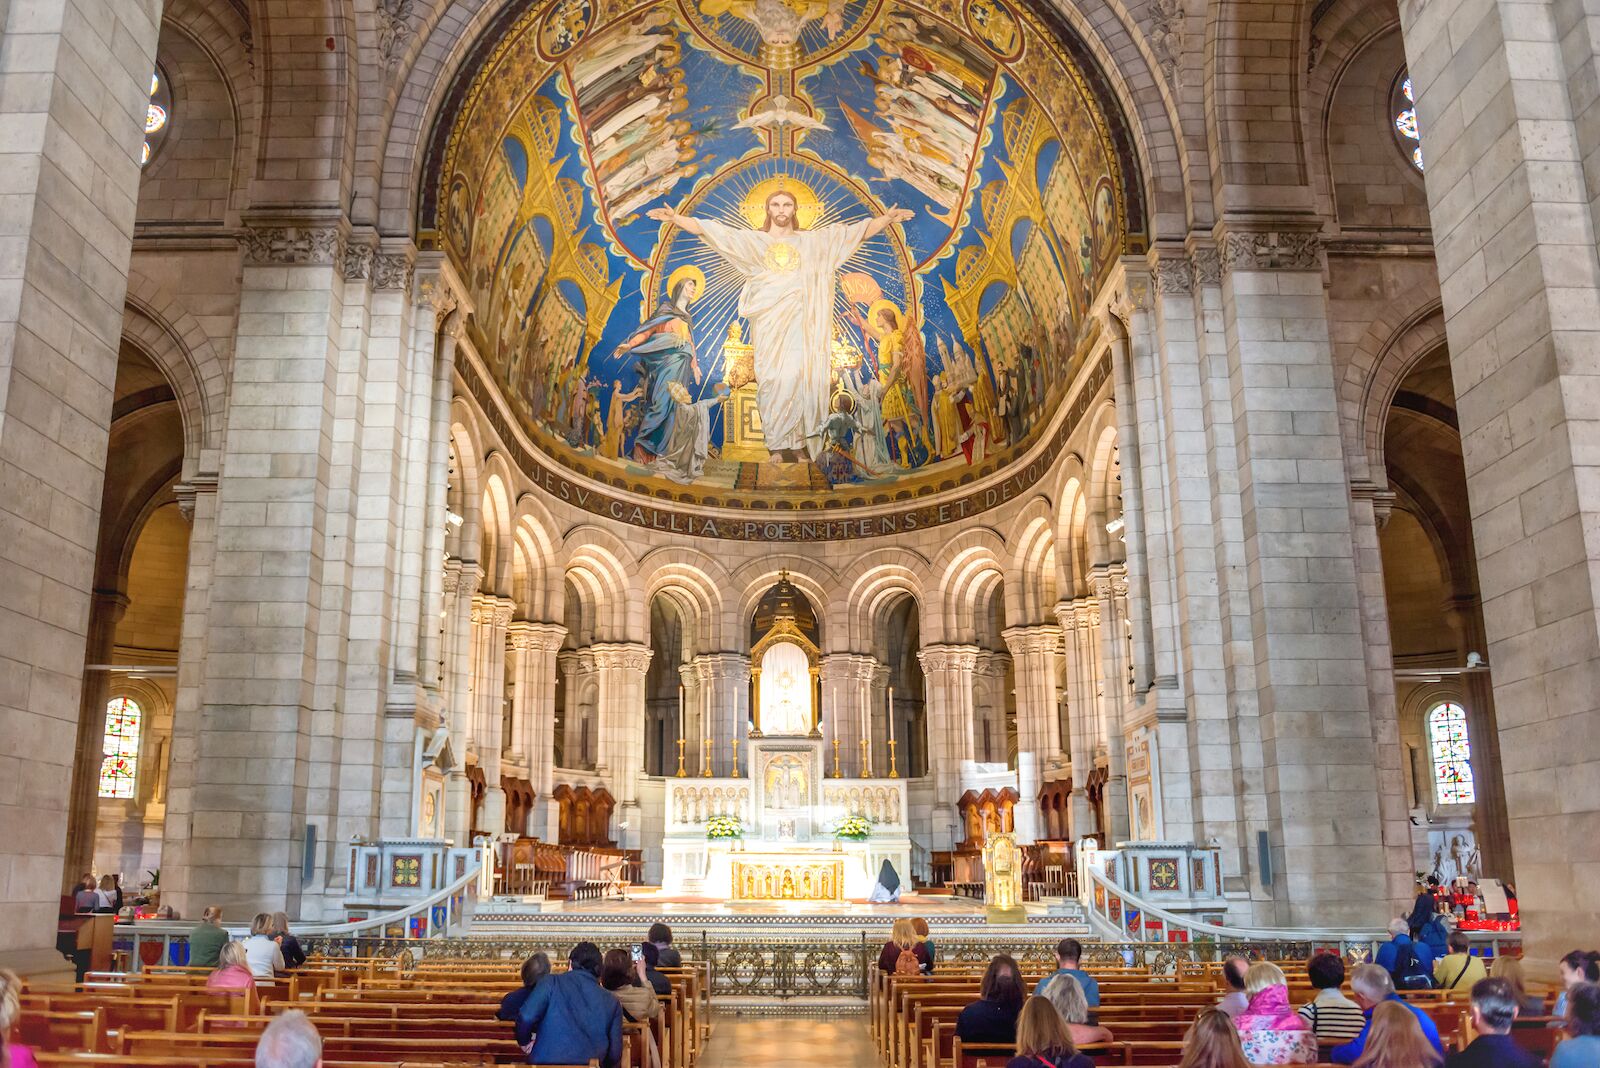 Inside the Sacré Coeur in Paris. The Sacré Coeur is home to the largest mosaic in France